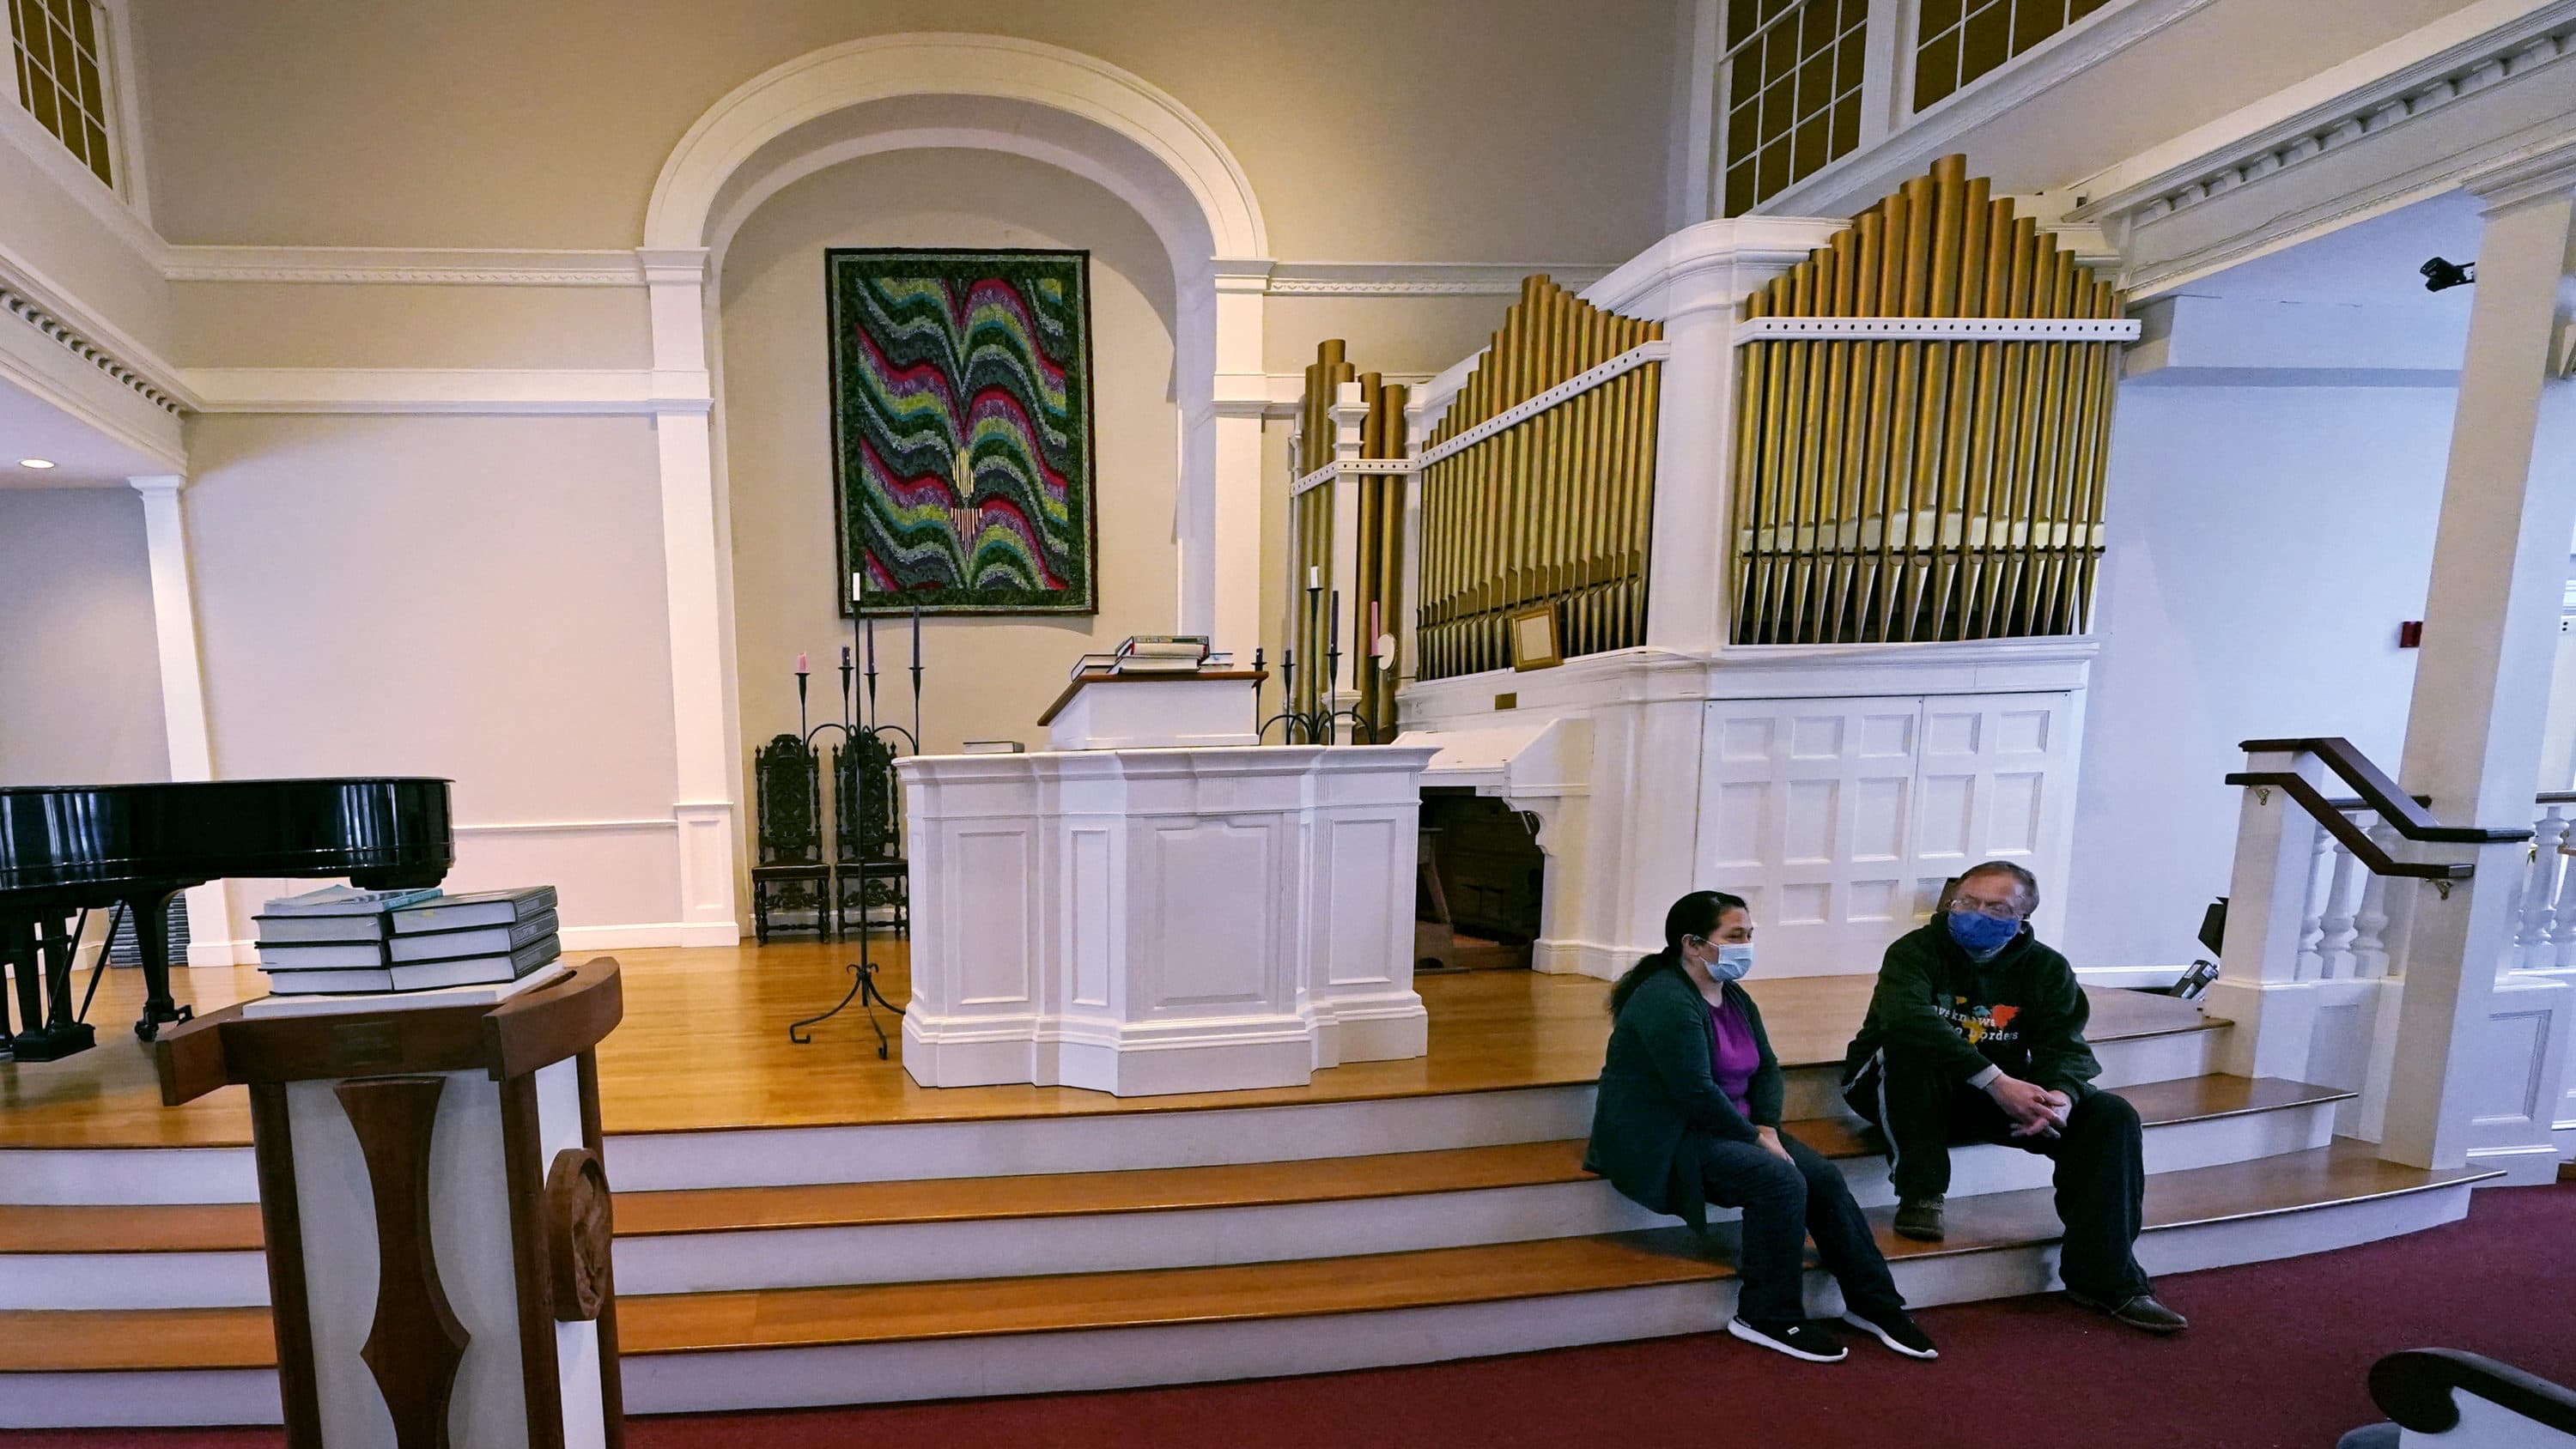 Maria Macario, left, talks with Rev. John Gibbons while seated on the steps to the altar at the First Parish church in Bedford. (Charles Krupa/AP)